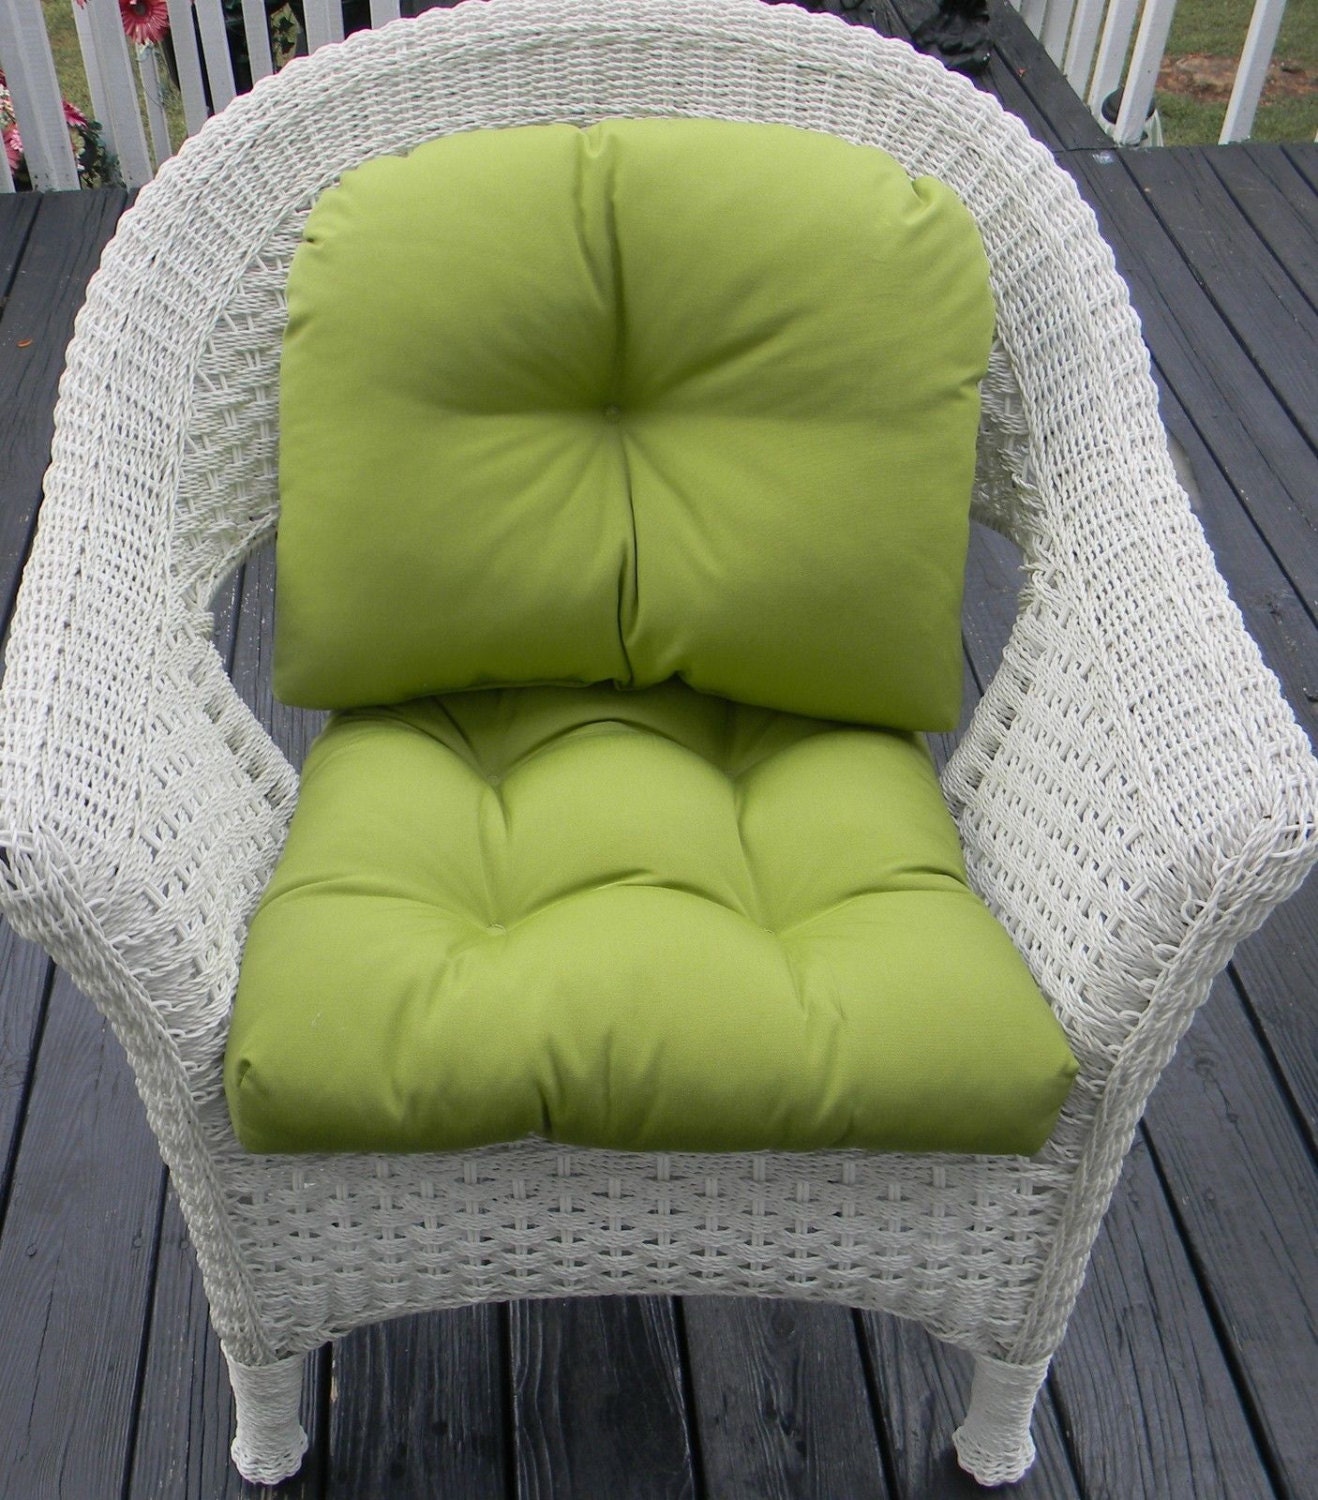 Indoor / Outdoor Wicker Chair Cushion & Back Pillow / Cushion